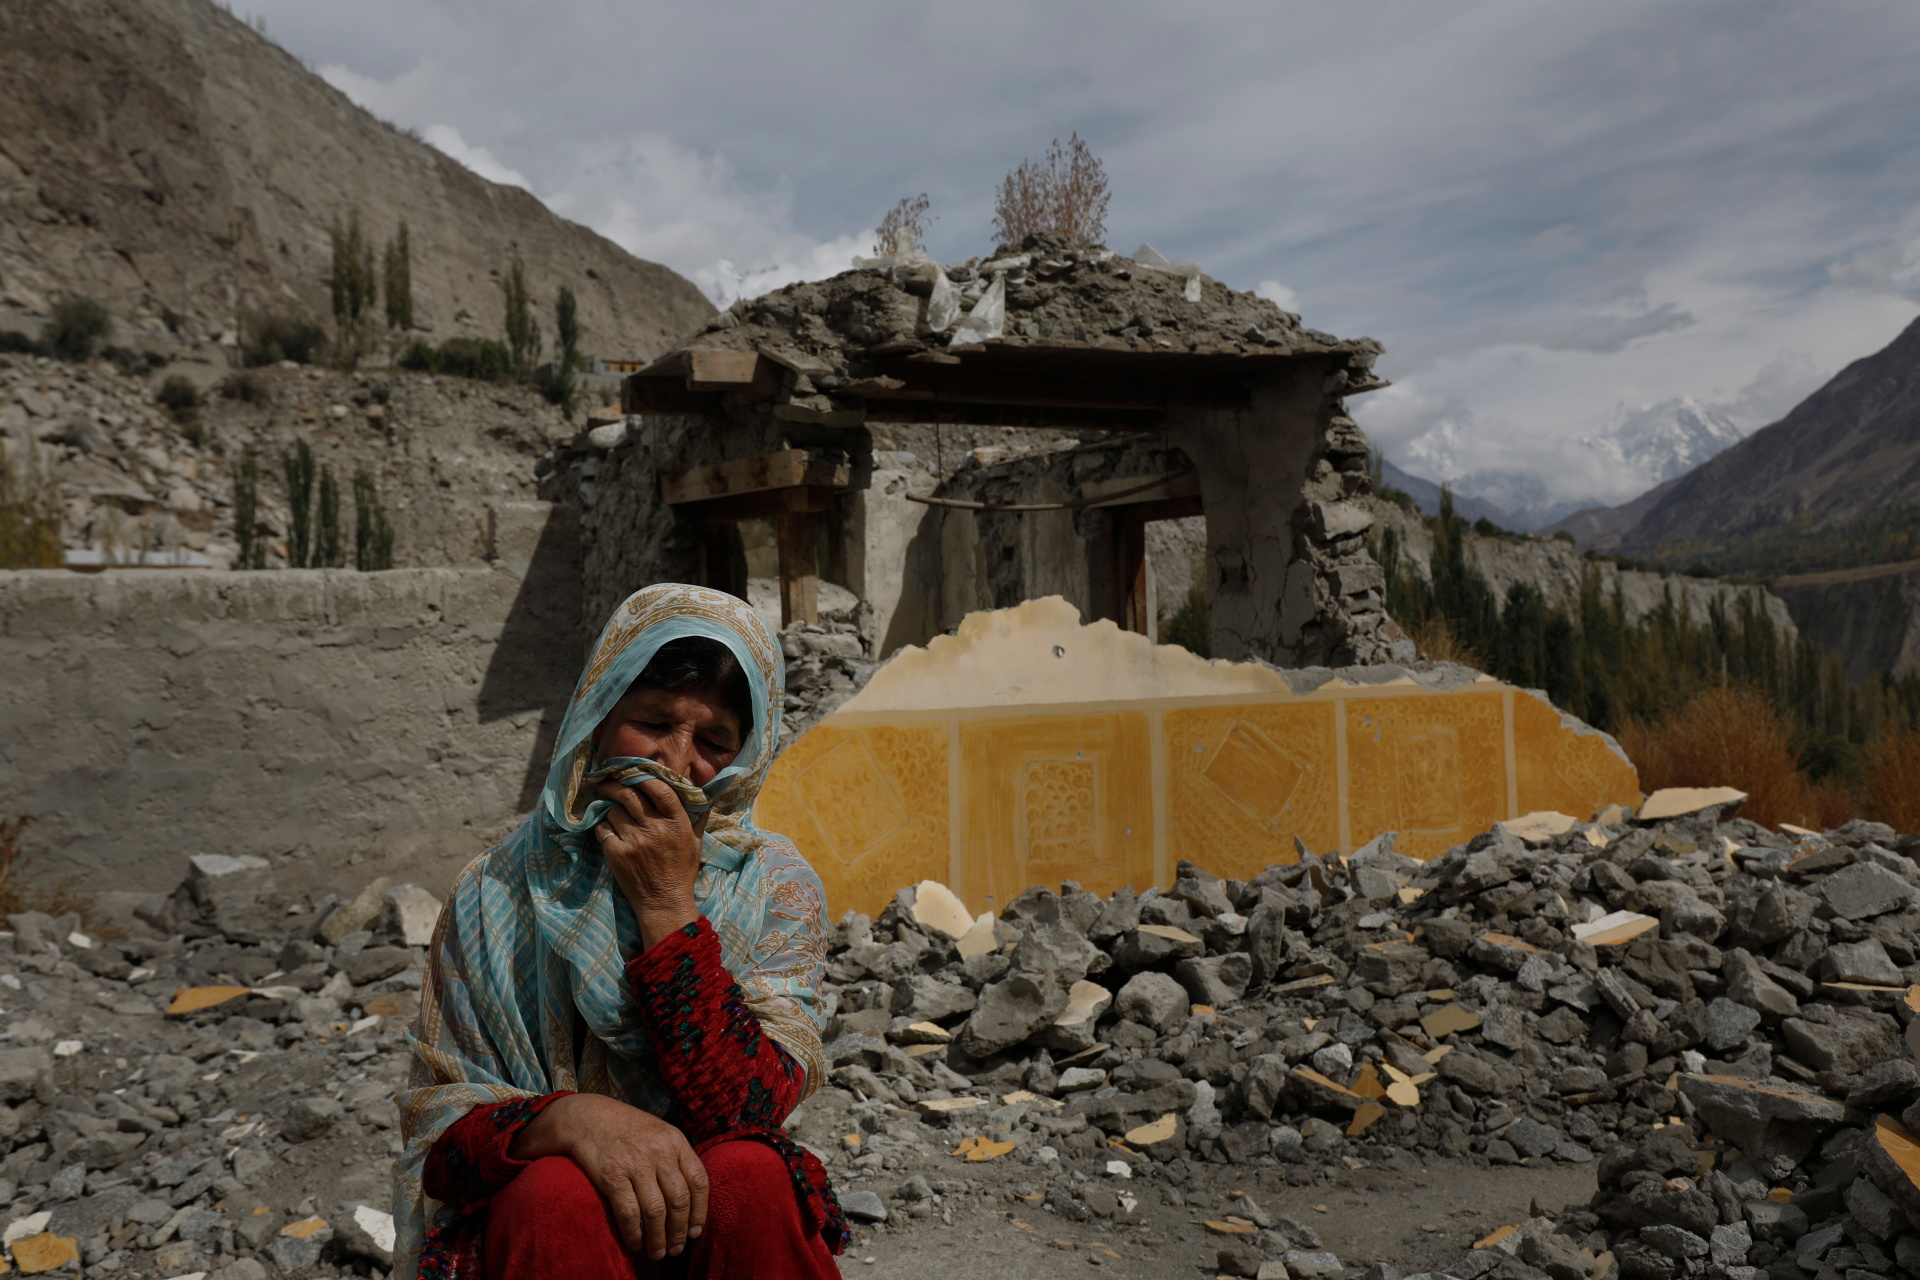 Dilshad Bano, 51, sits on the floor near her house which was damaged after a Glacial Lake Outburst Flooding (GLOF) incident, in Hassanabad village, Pakistan, 9 October 2023 Photo: Akhtar Soomro / REUTERS